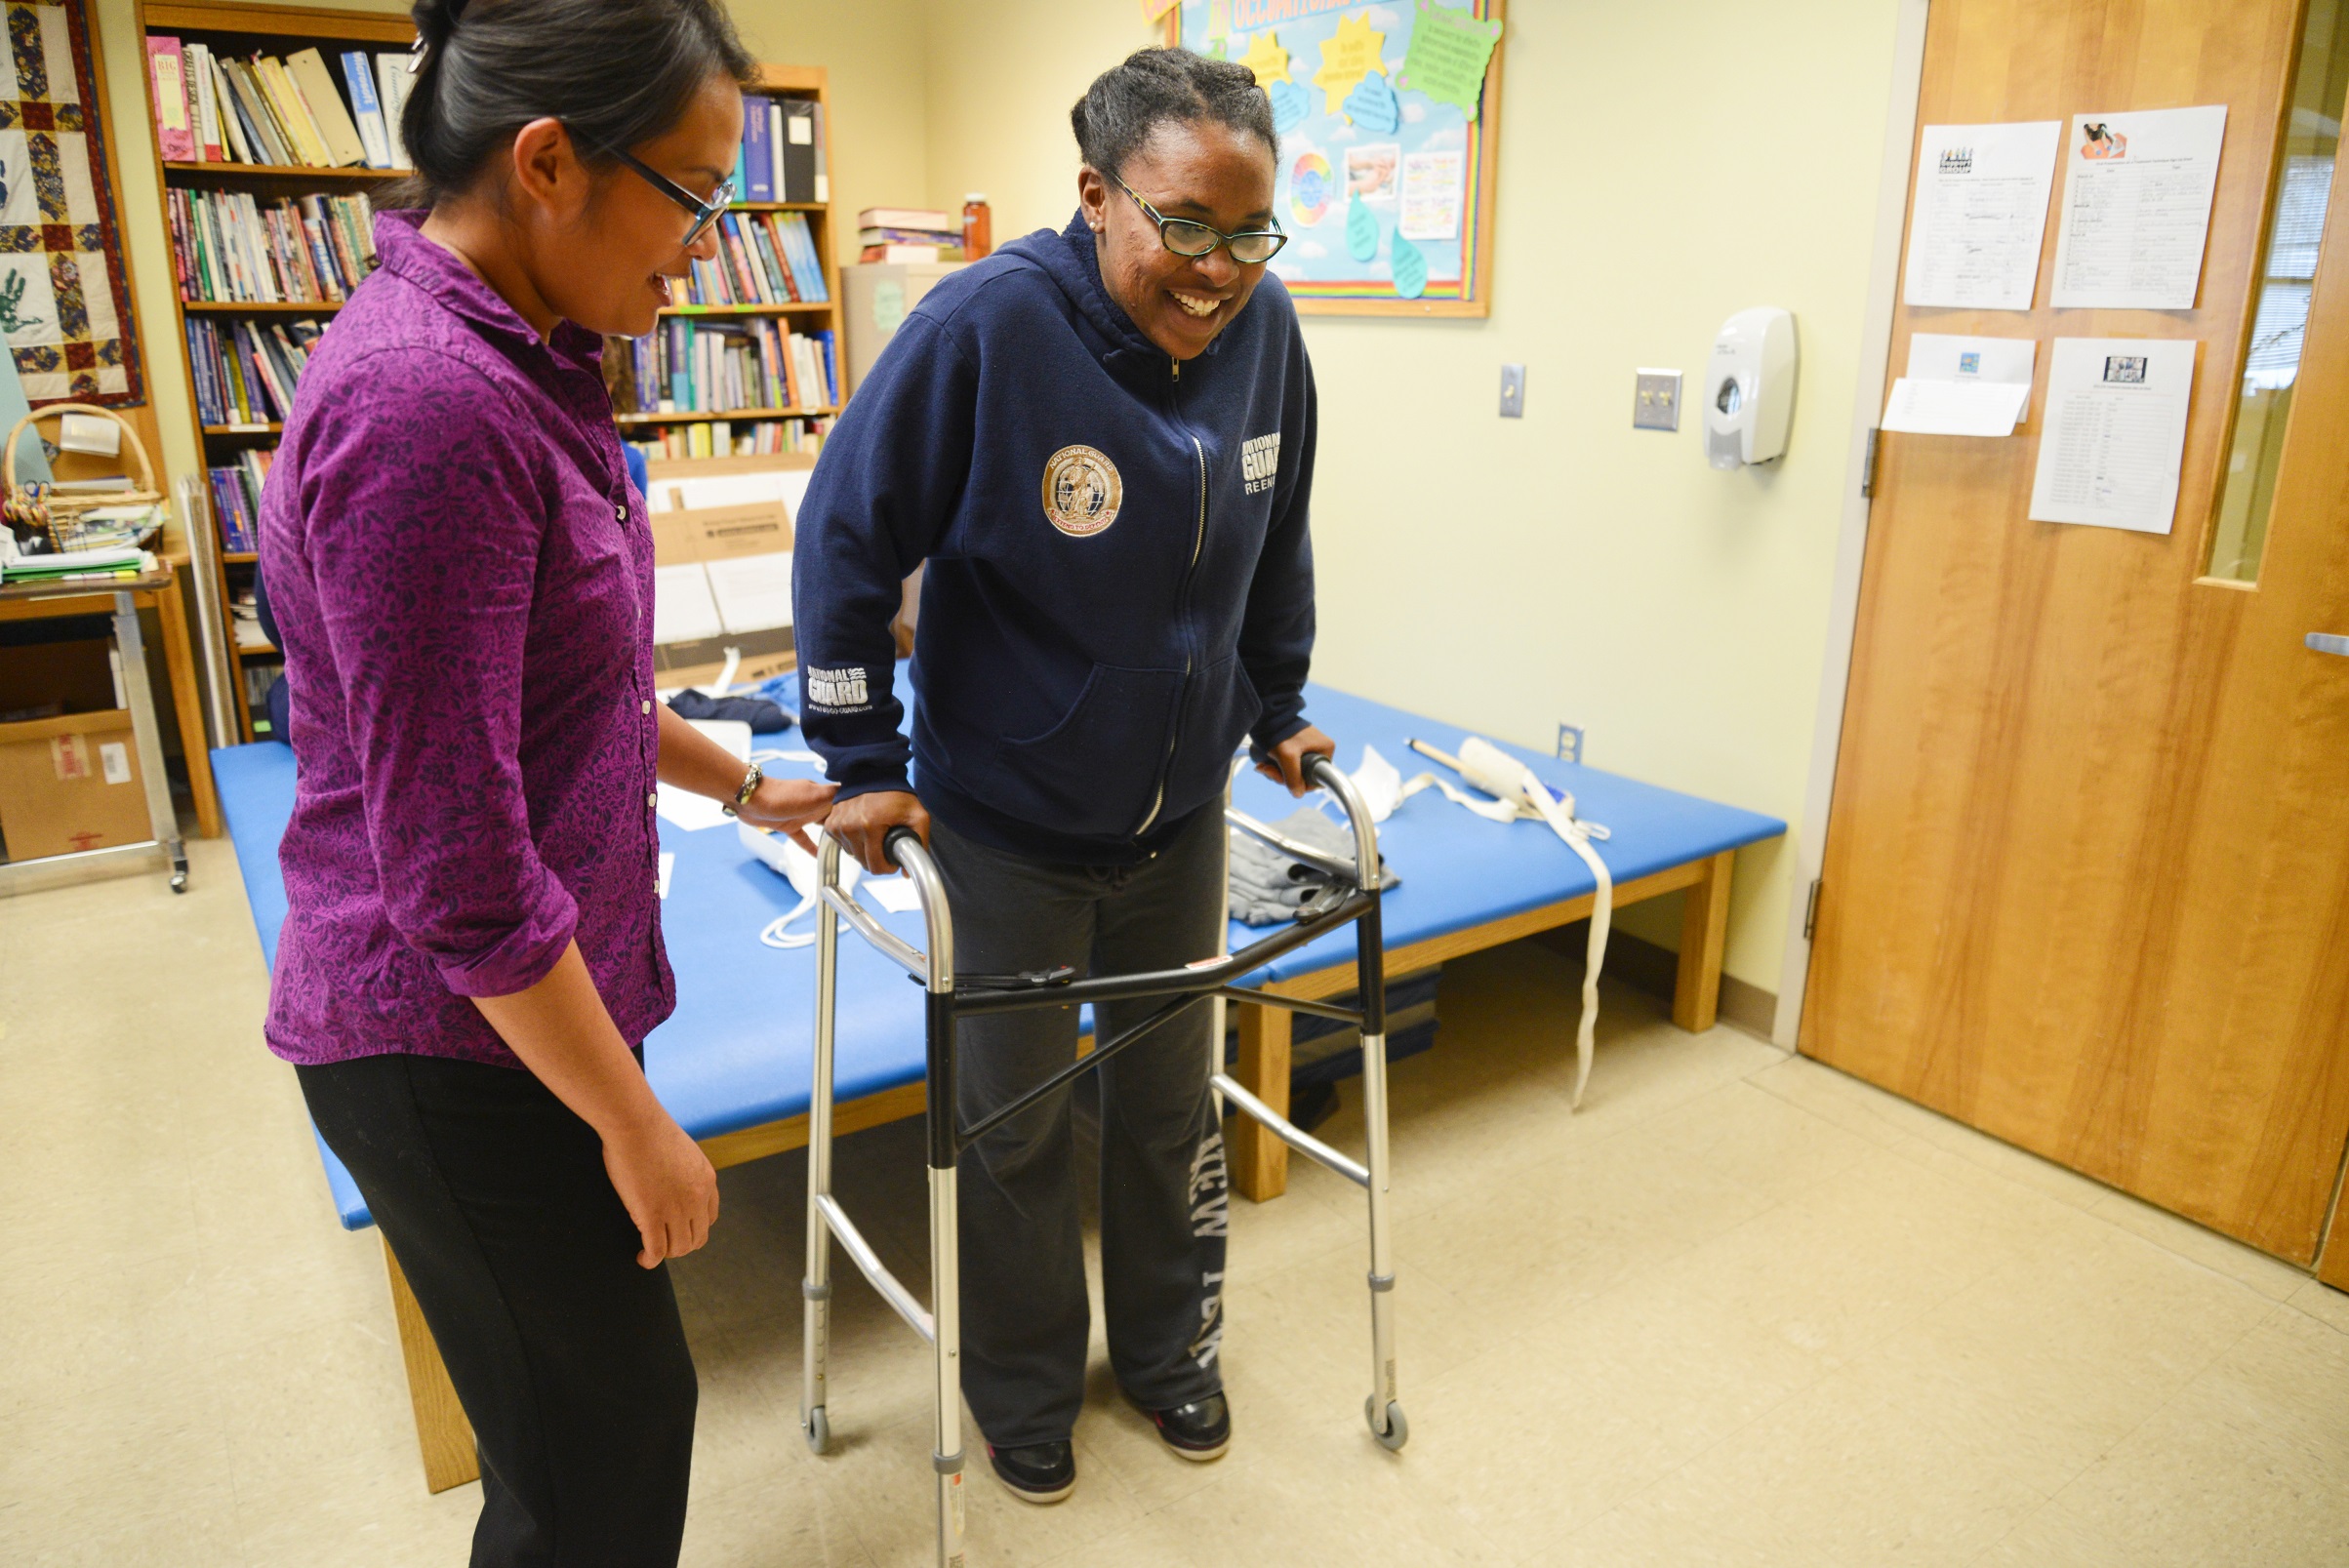 one student using a walker and another student assisting